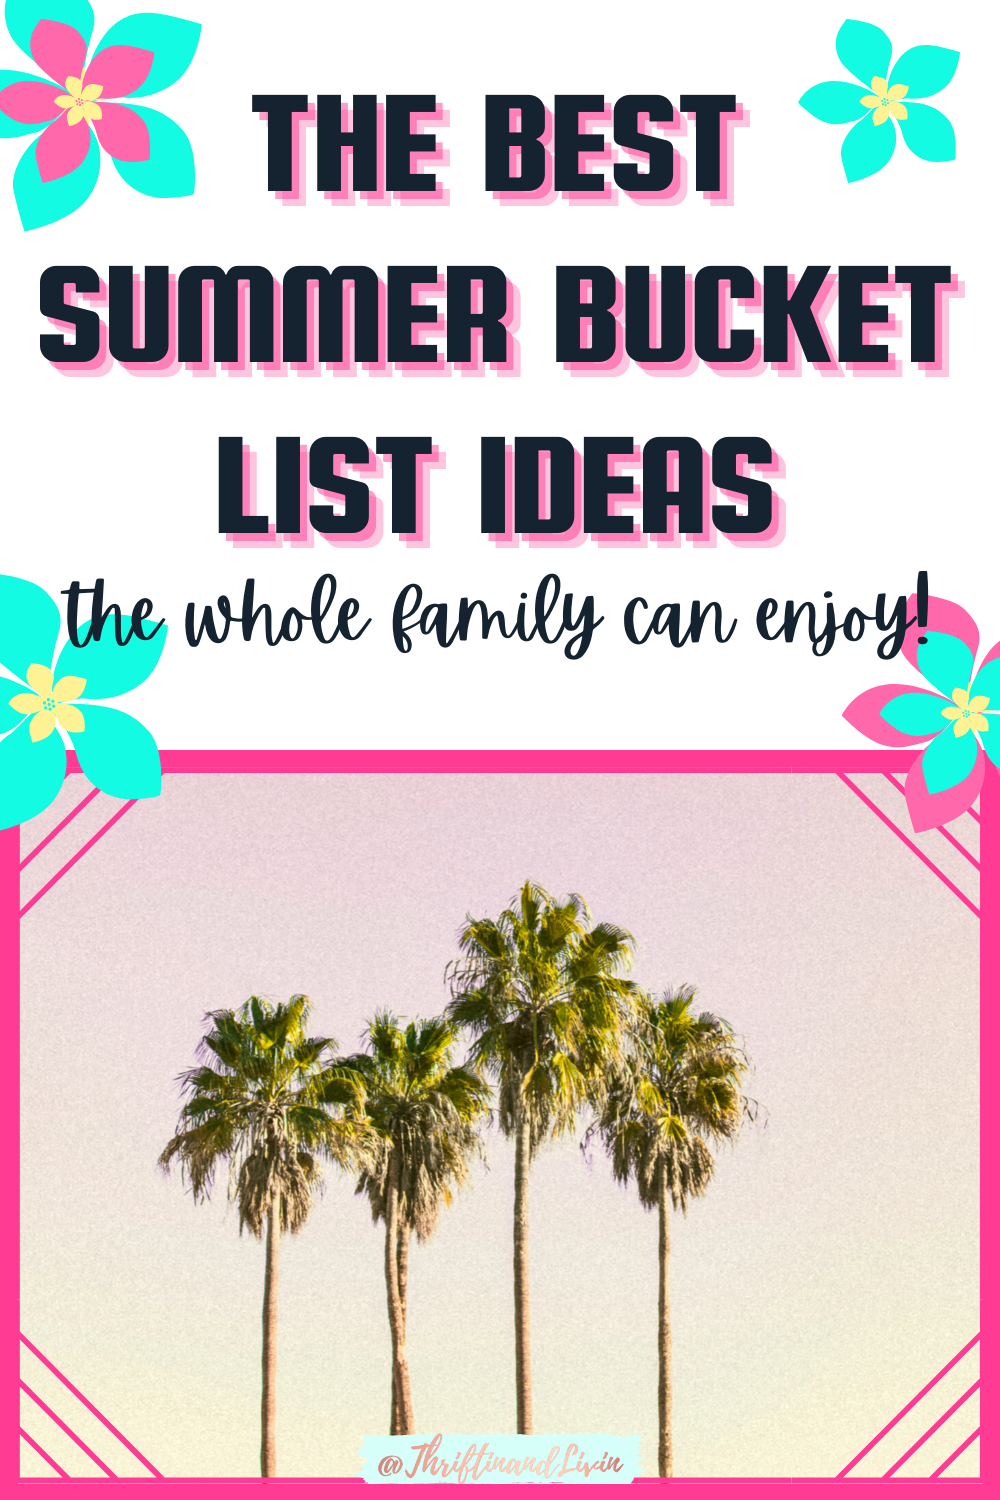 The Best Summer Bucket List Ideas - the whole family can enjoy! Pinterest Pin Image